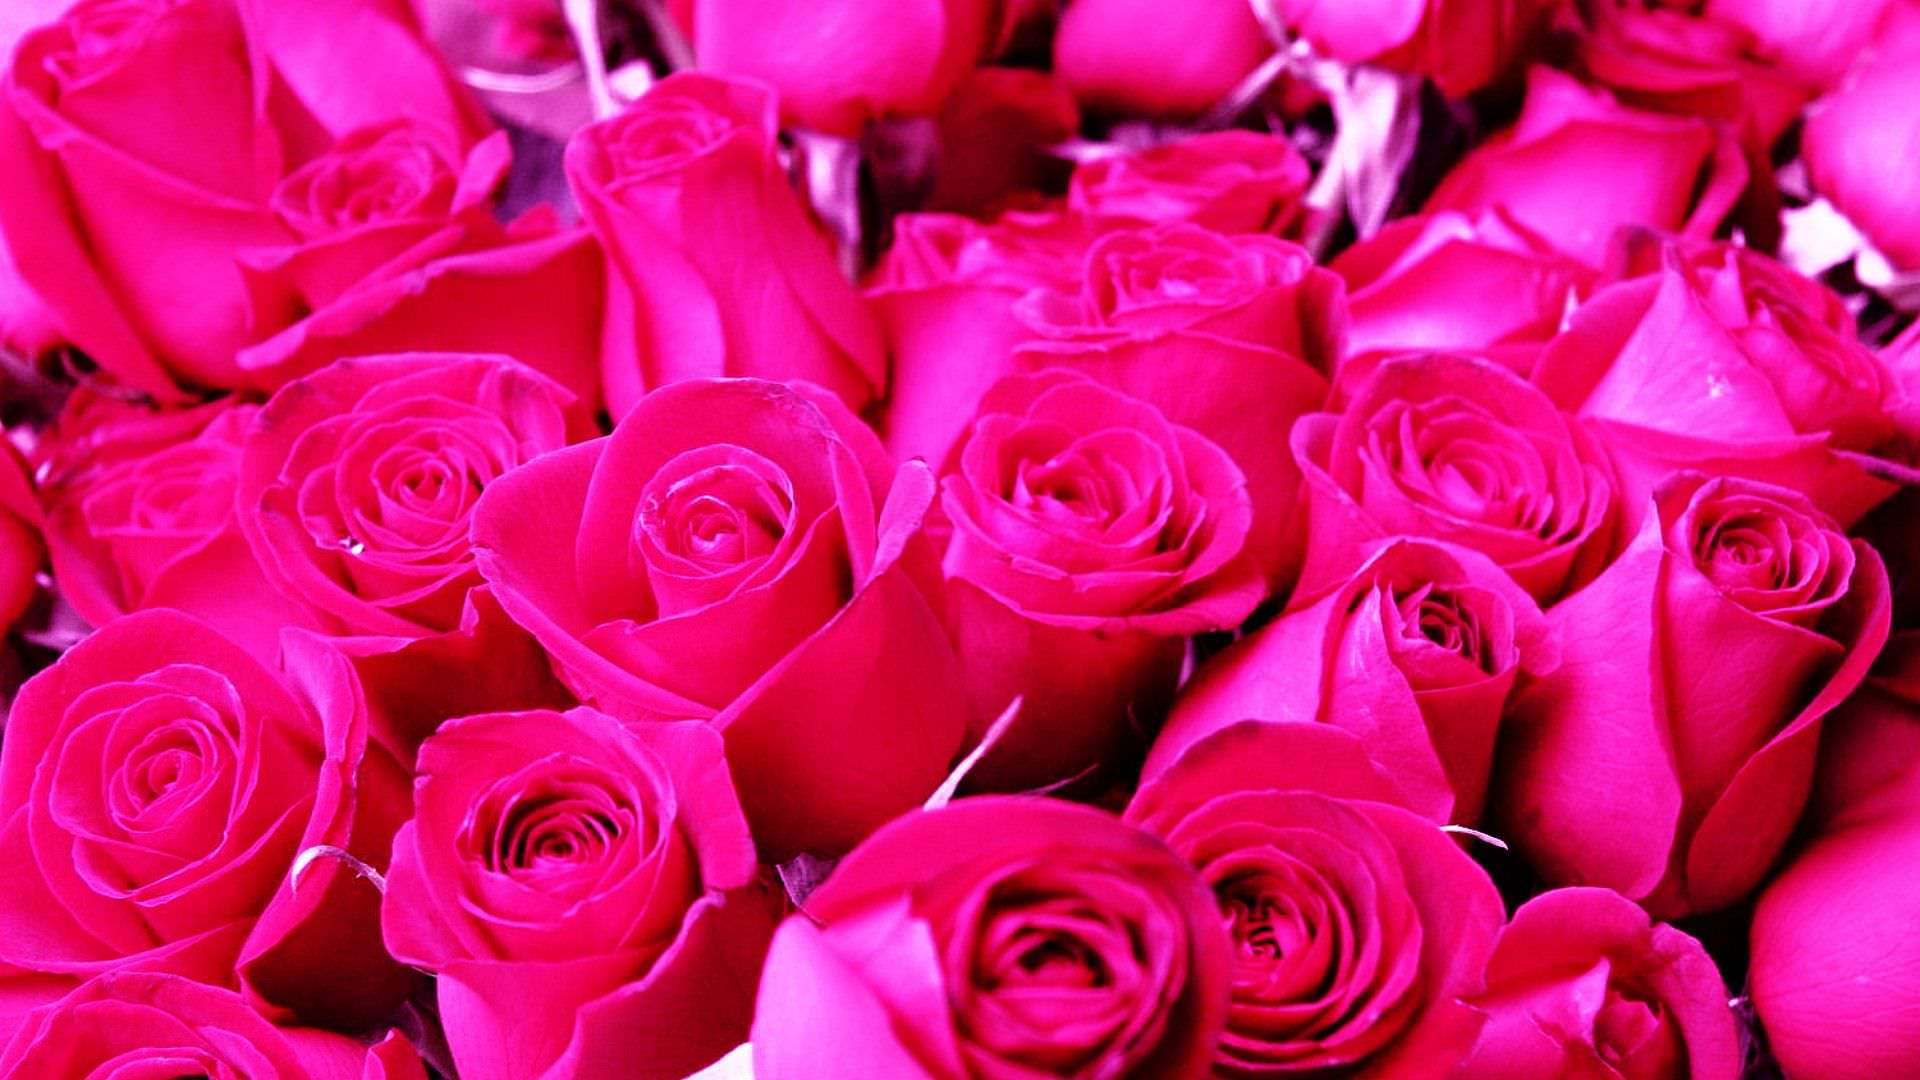 Cool Pink Rose Wallpaper Pretty Backgrounds Of Roses